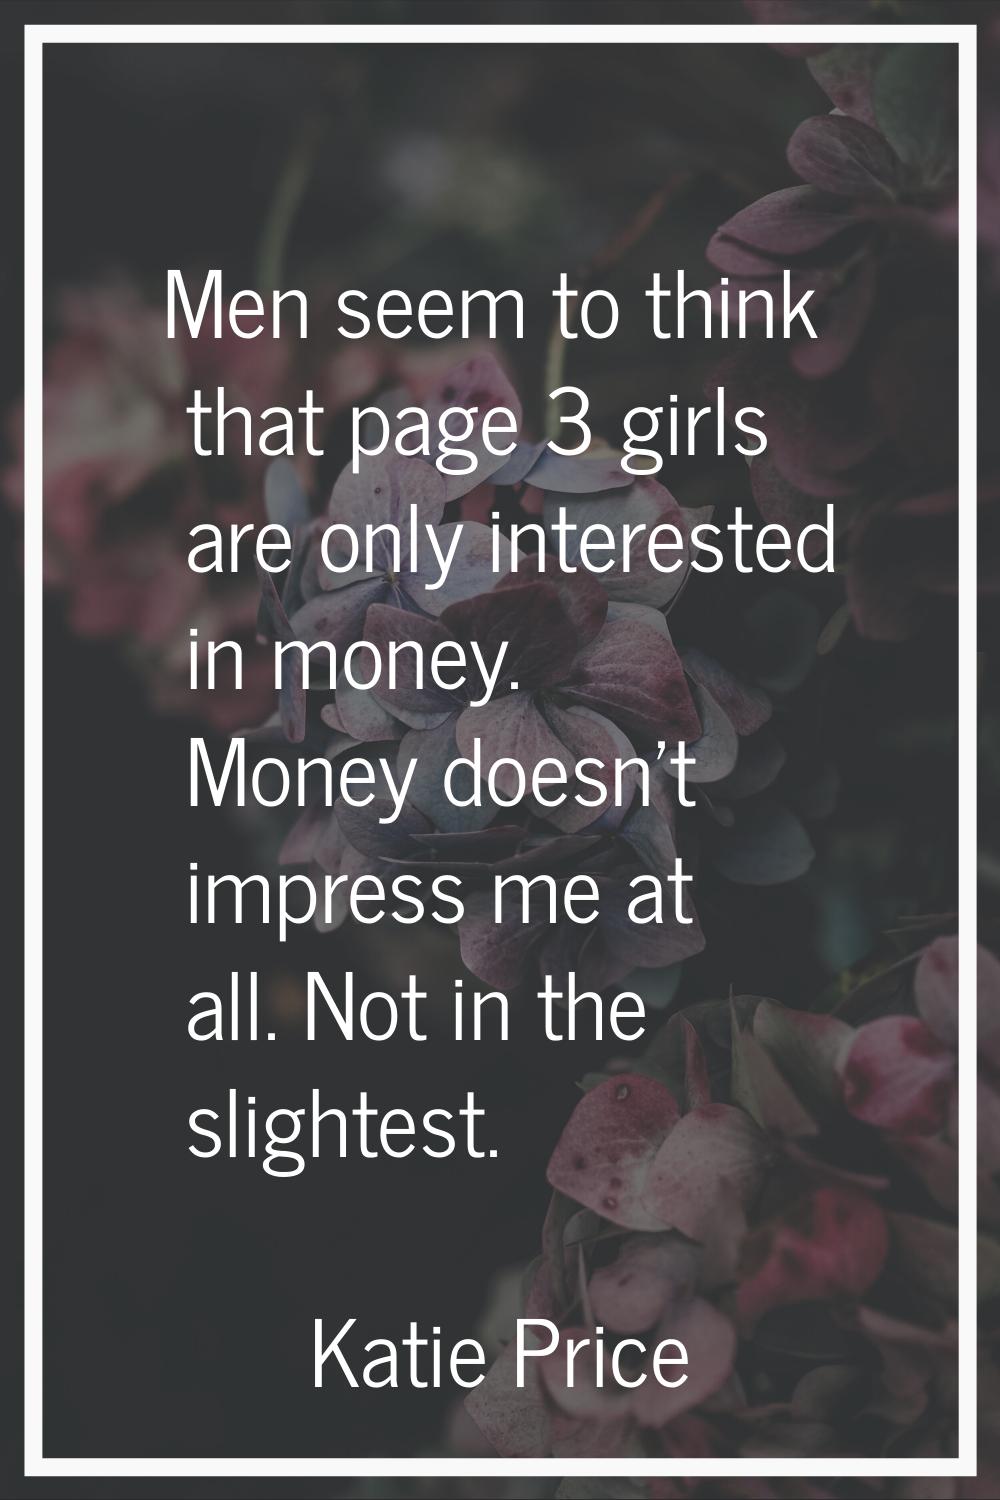 Men seem to think that page 3 girls are only interested in money. Money doesn't impress me at all. 